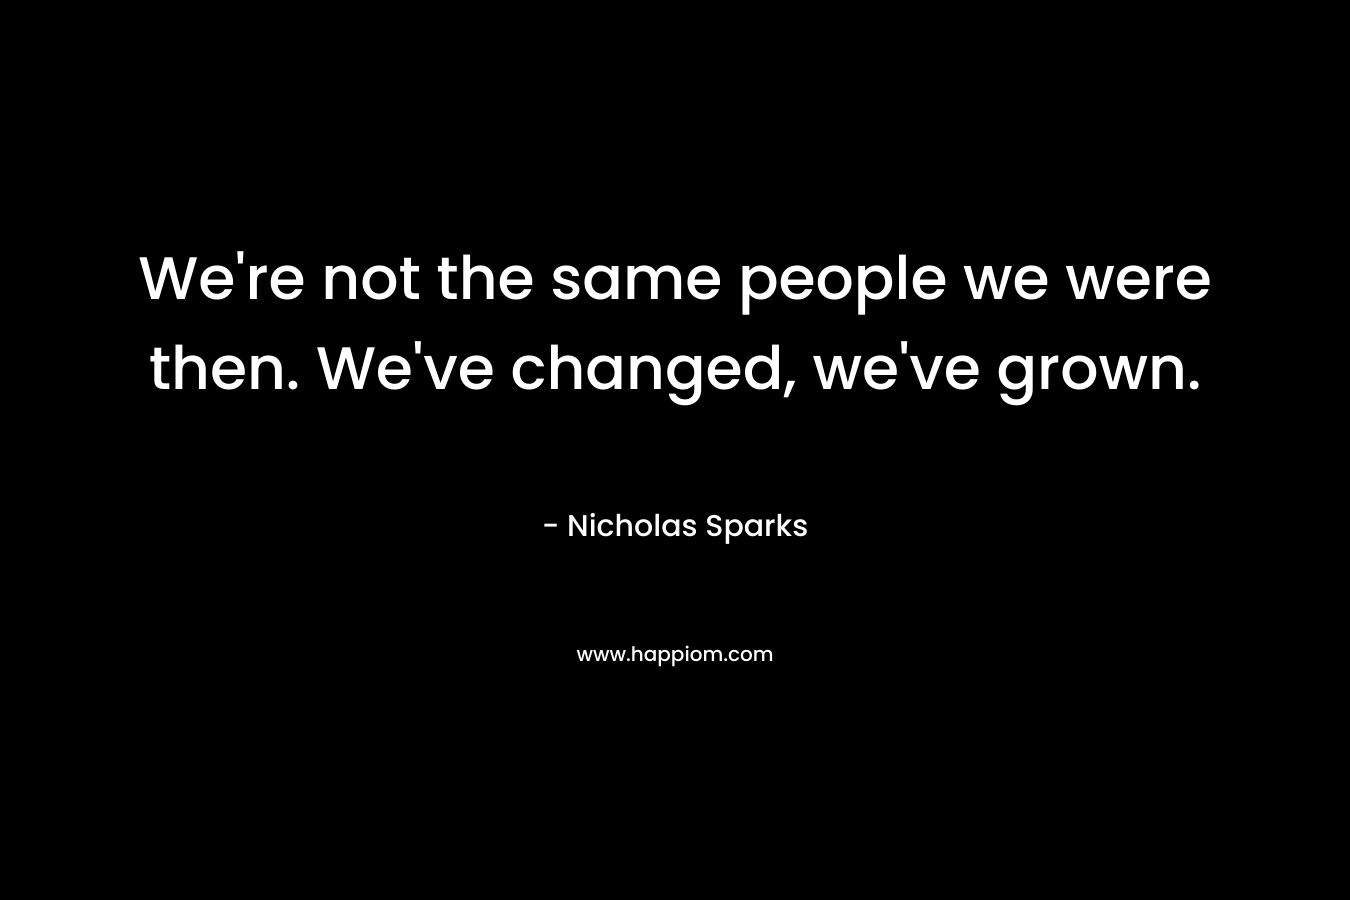 We're not the same people we were then. We've changed, we've grown.